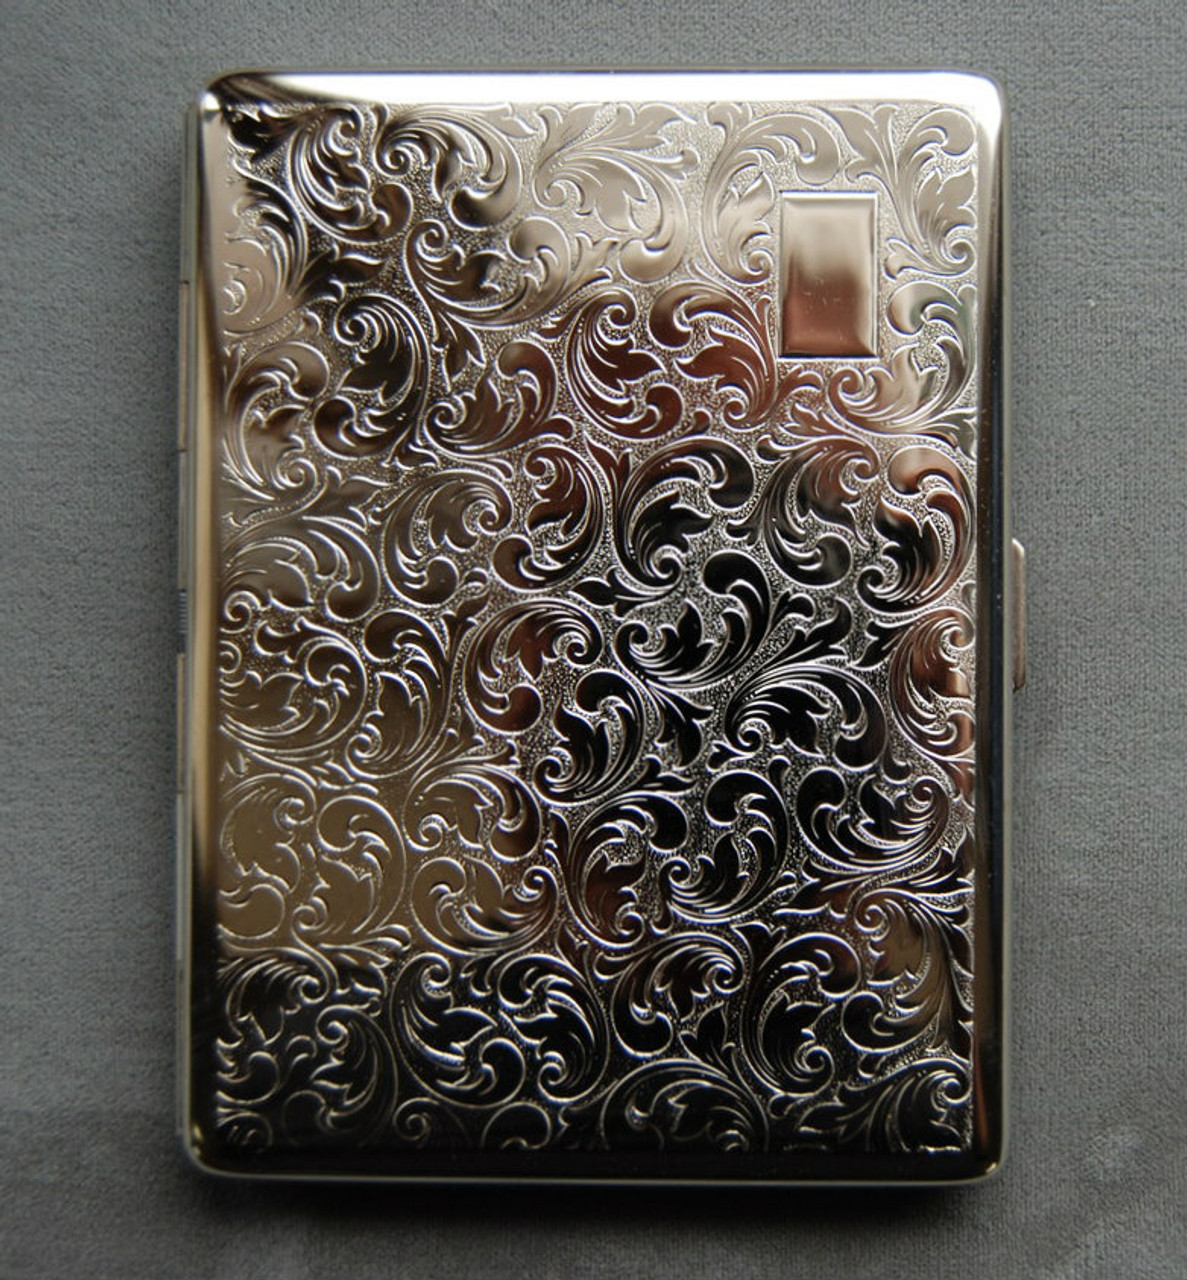 100's Double Sided Crush-Proof Metal Cigarette Case